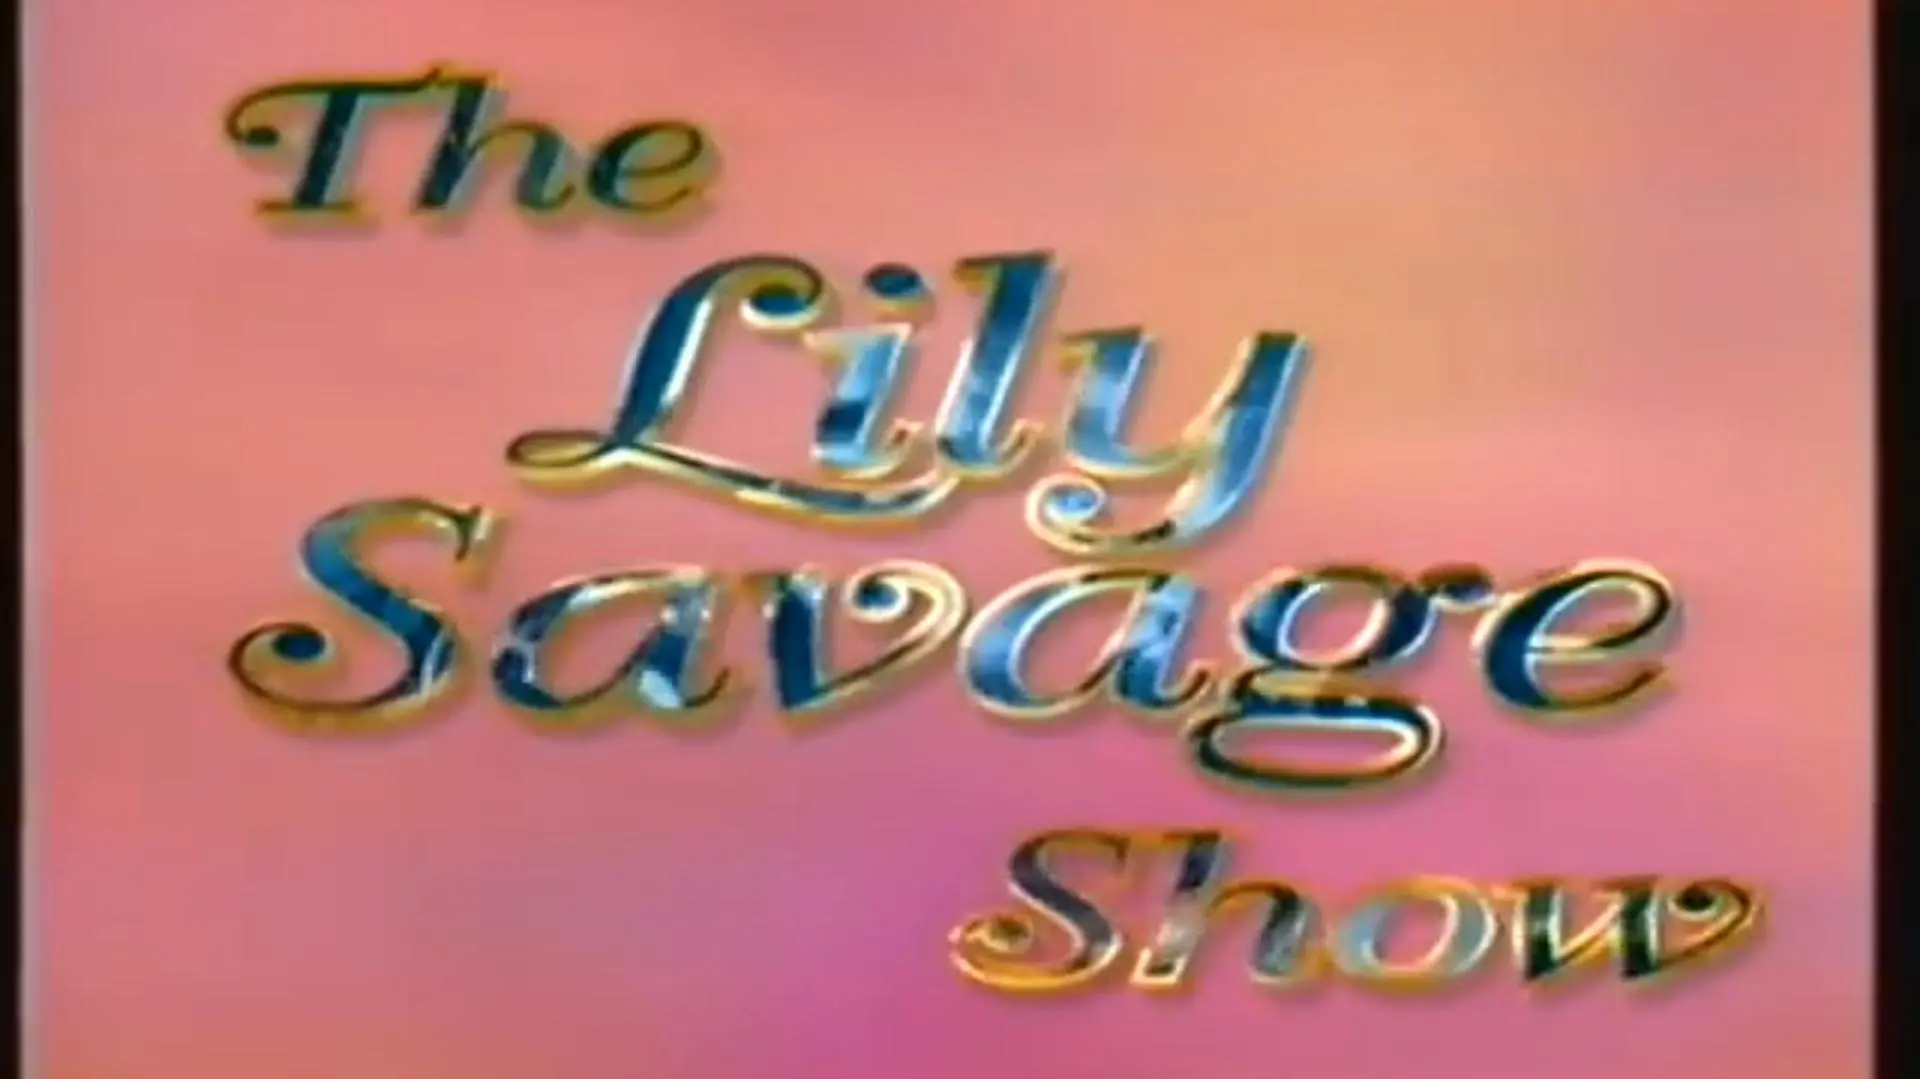 The Lily Savage Show_peliplat